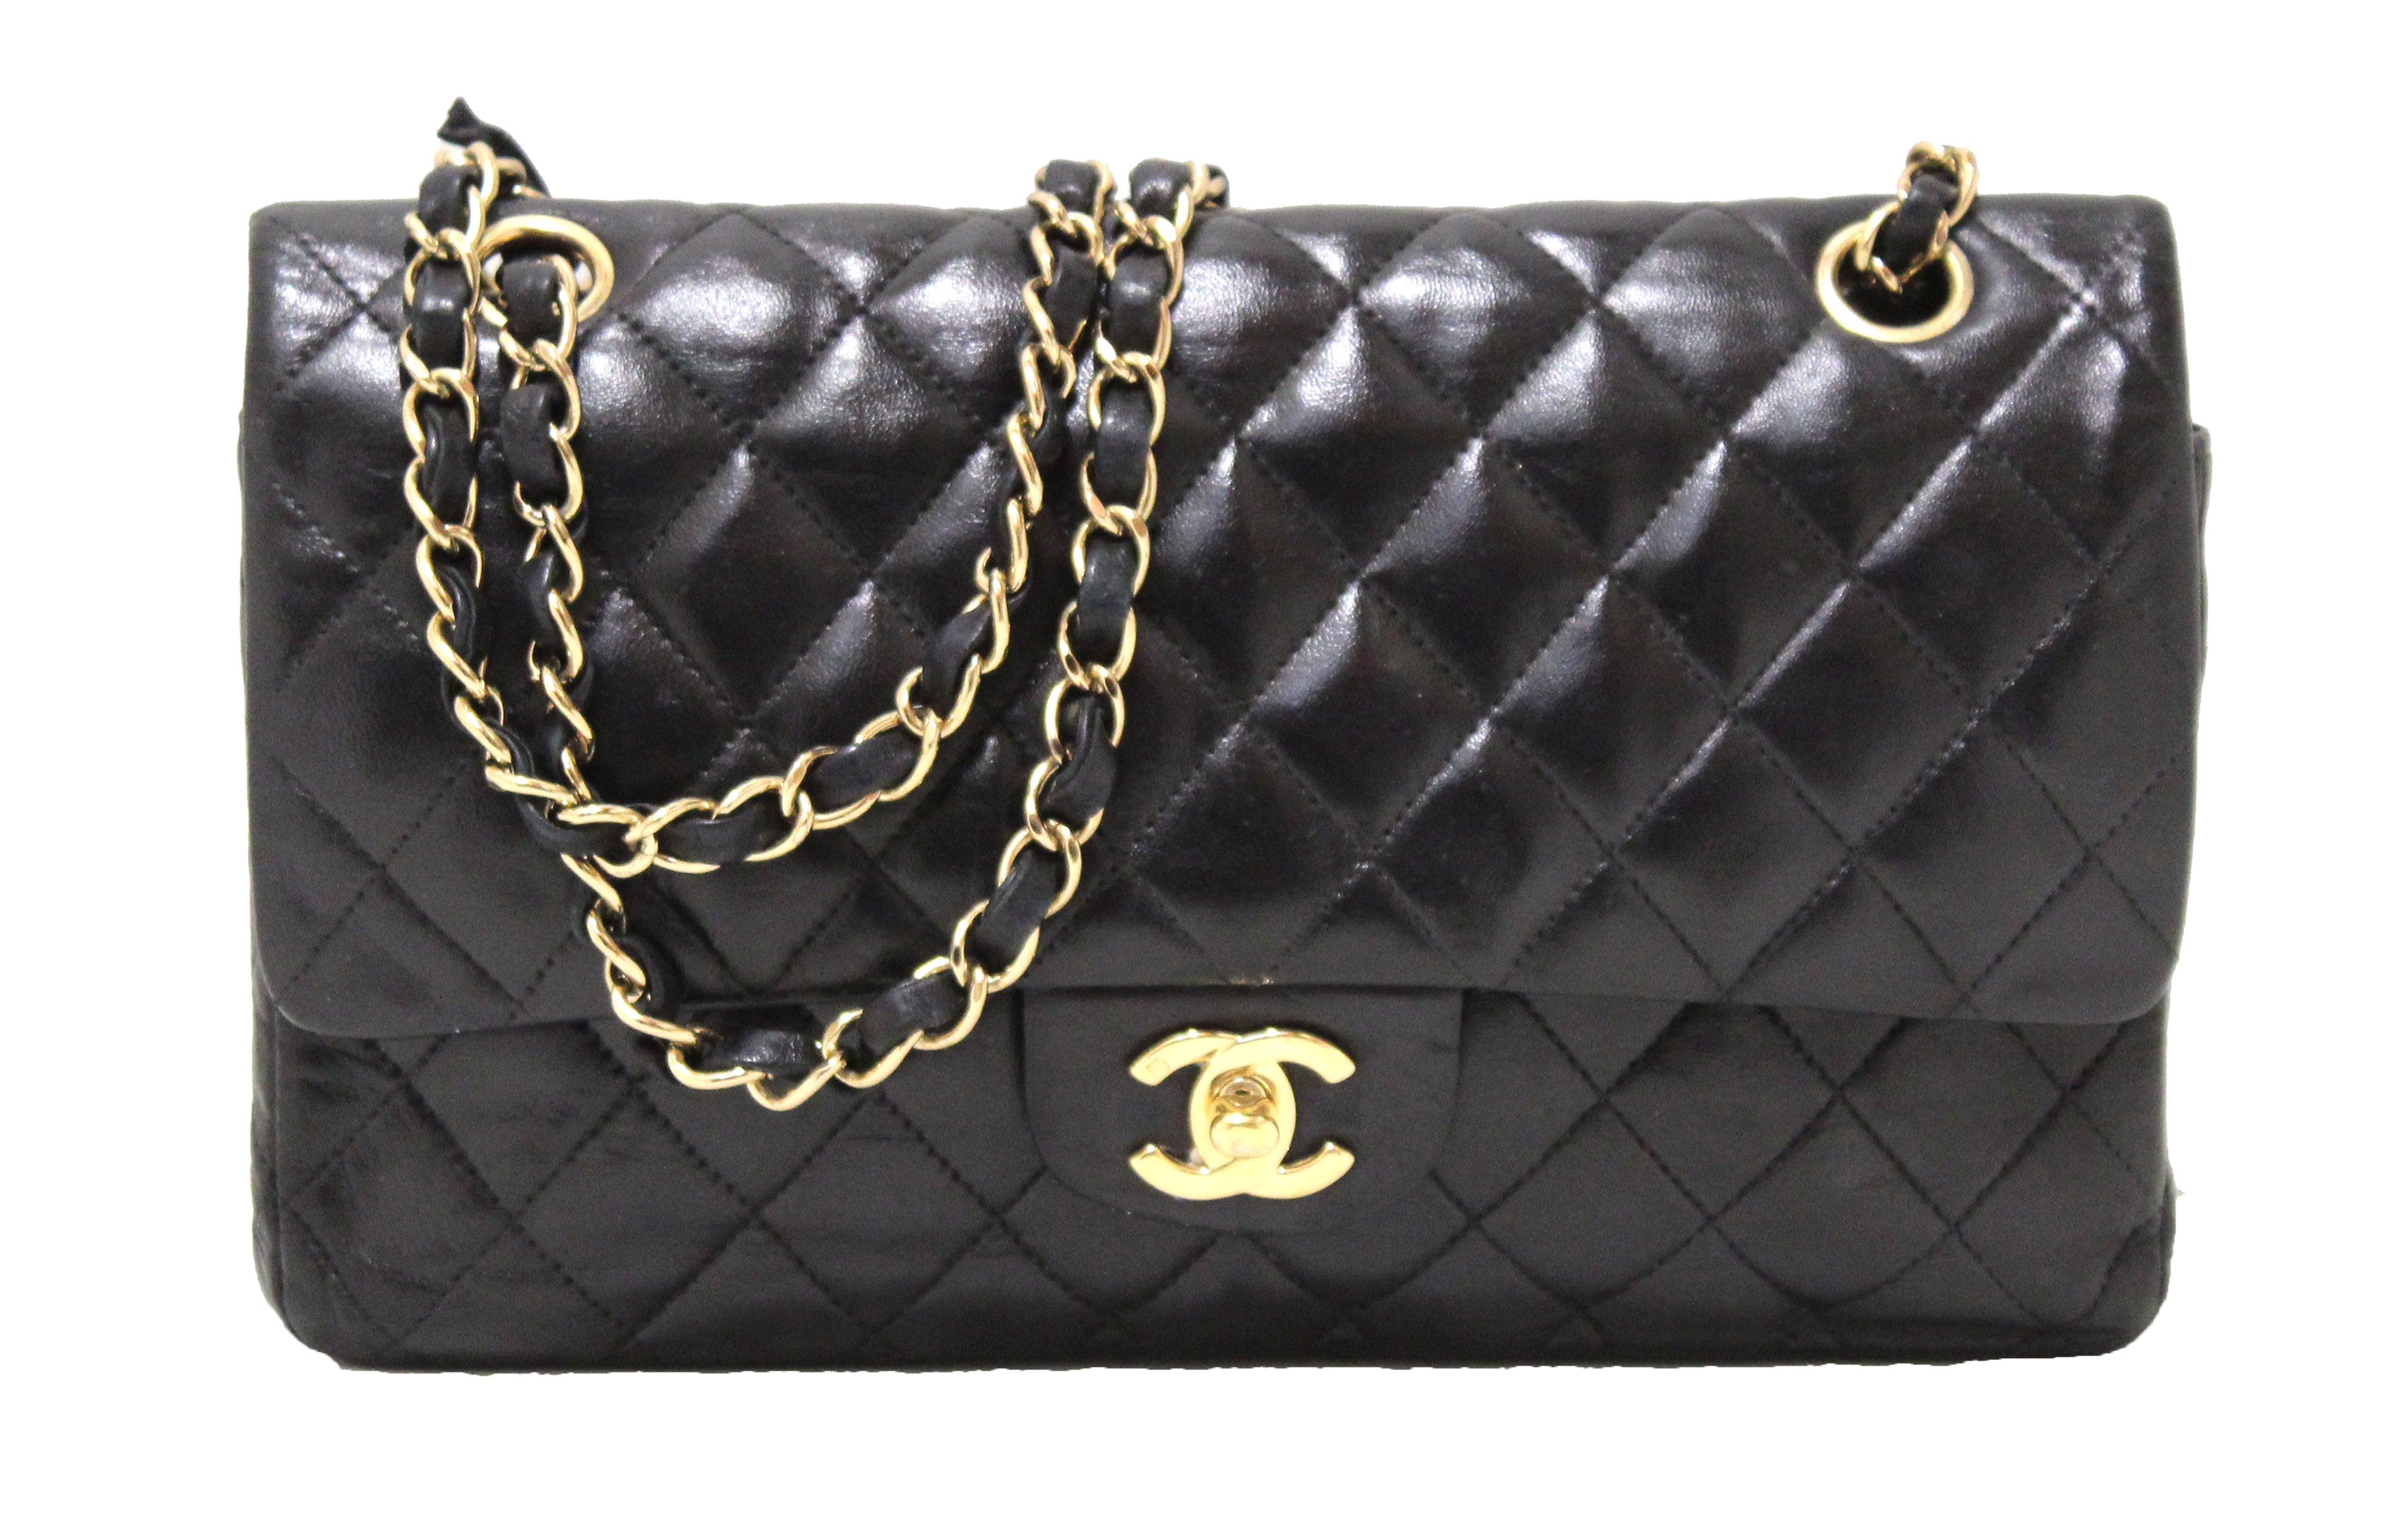 Authentic CHANEL Double Flap Black Quilted Leather Gold Chain Shoulder Bag